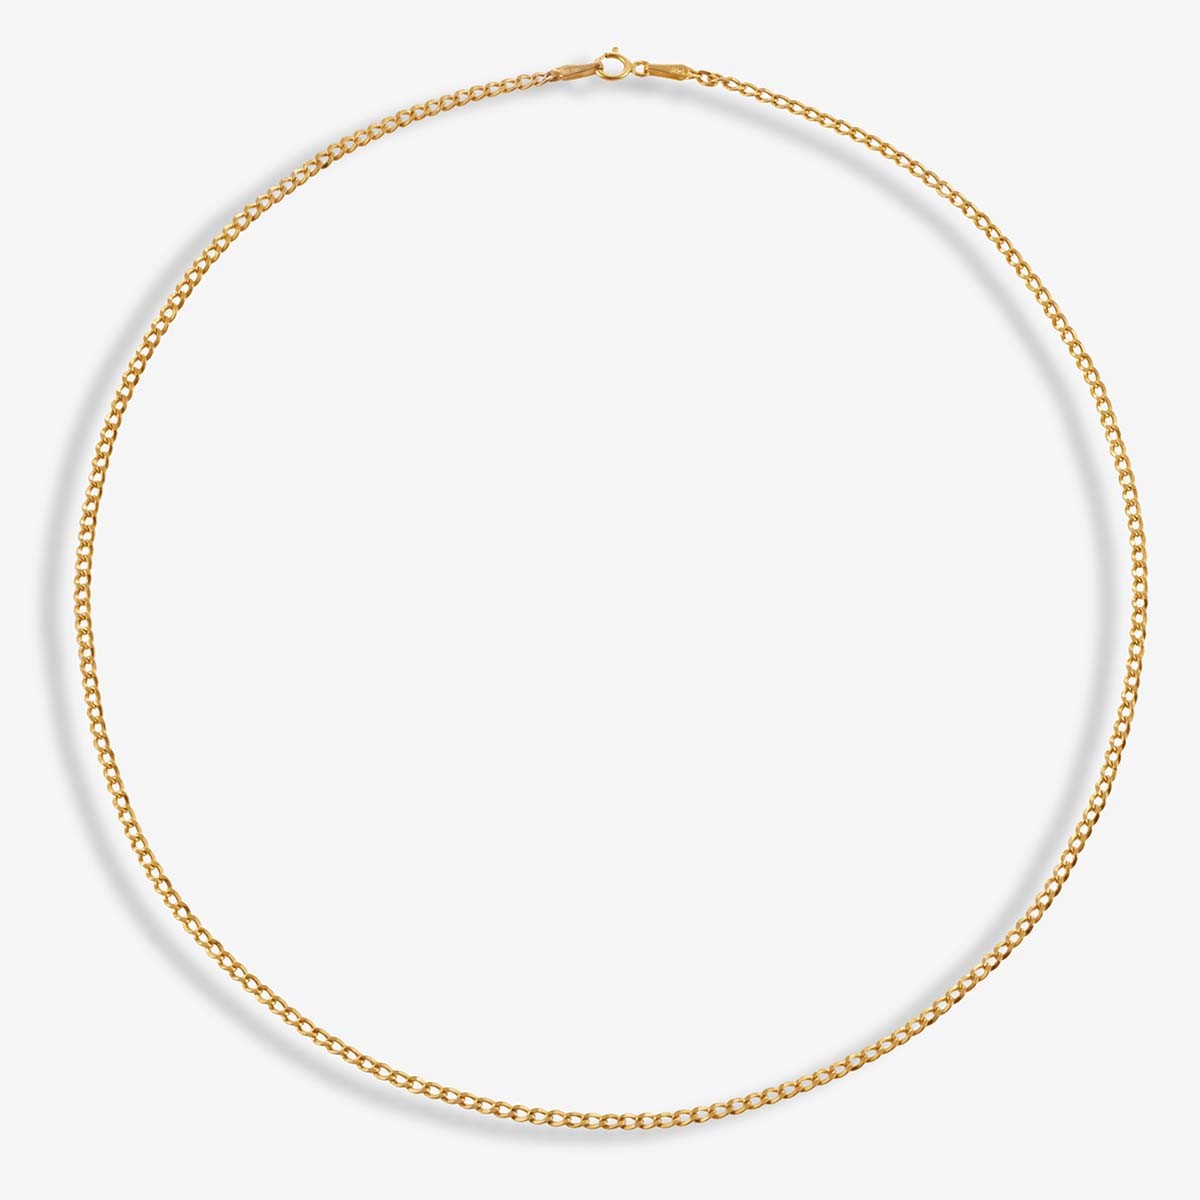 Off The Chain - Halskette - 14k Gold